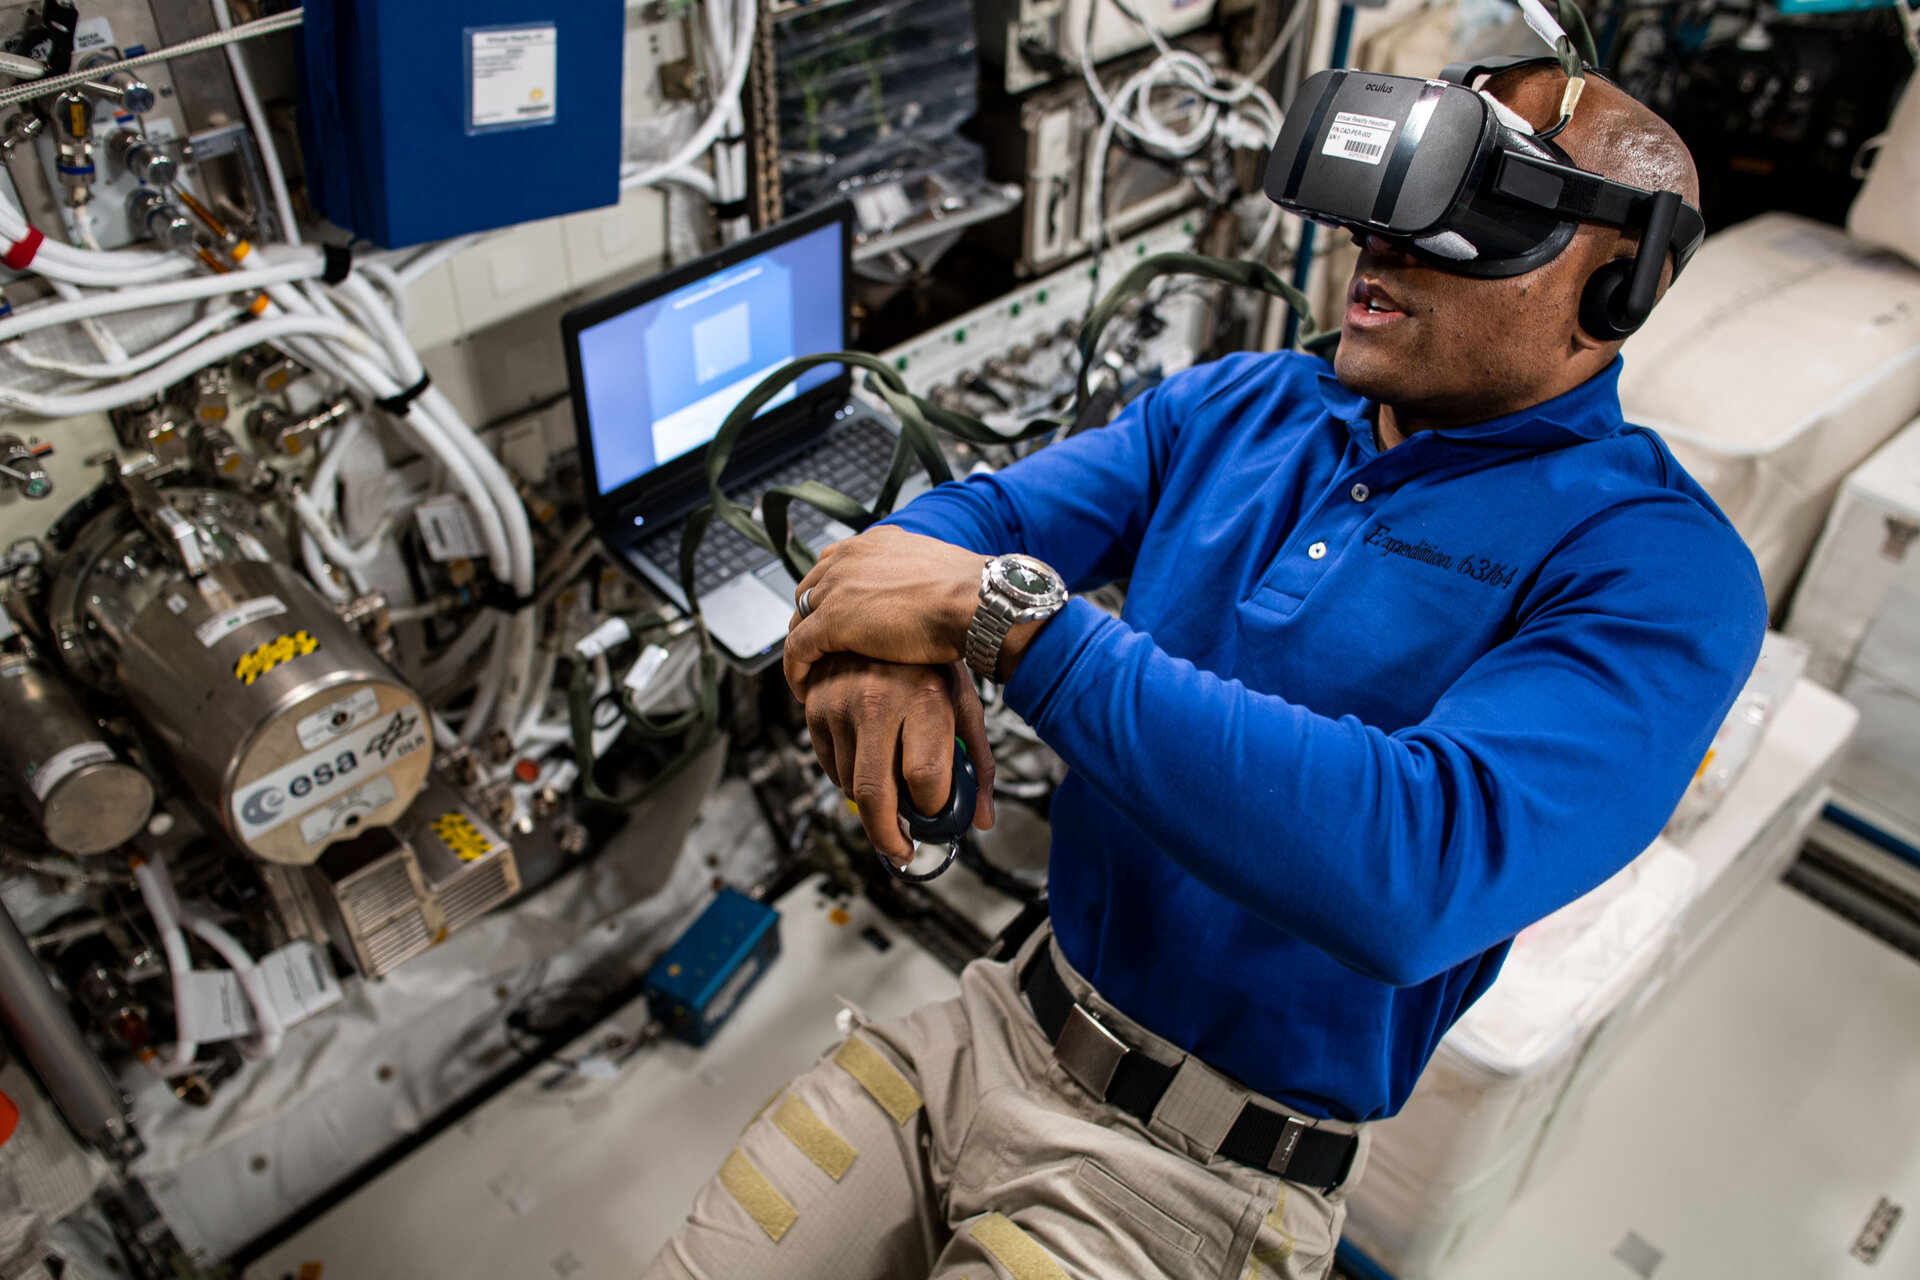 NASA astronaut Victor Glover tests out the European Space Agency's Time experiment in this image, snapped aboard the International Space Station where Glover is currently staying. The experiment uses virtual reality technology to see how being in space changes an astronaut's perception of time.